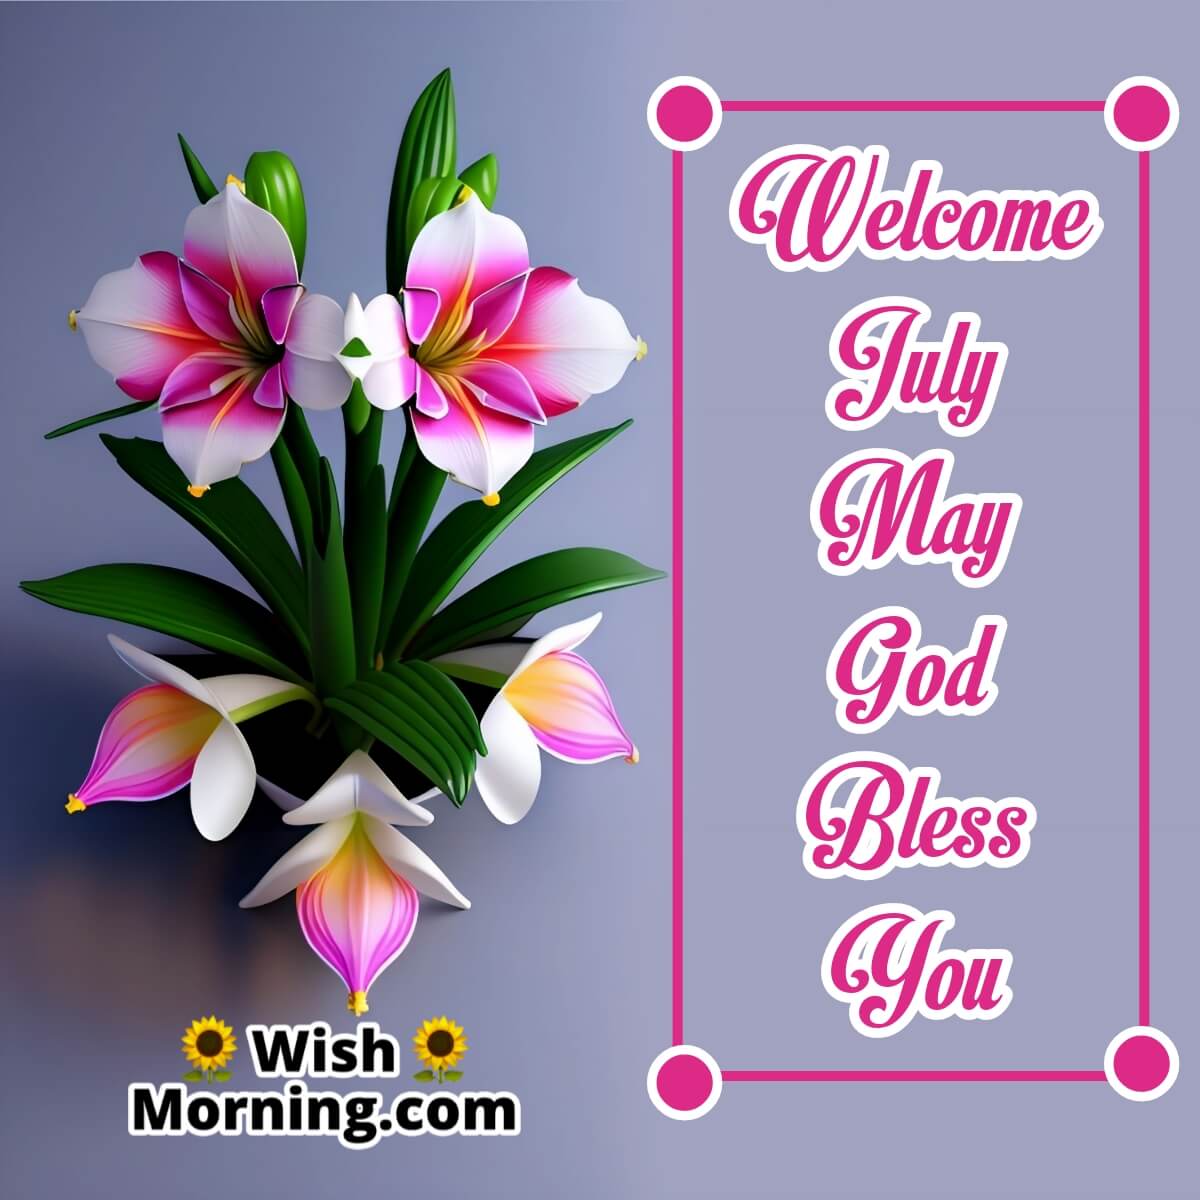 Welcome July God Bless You